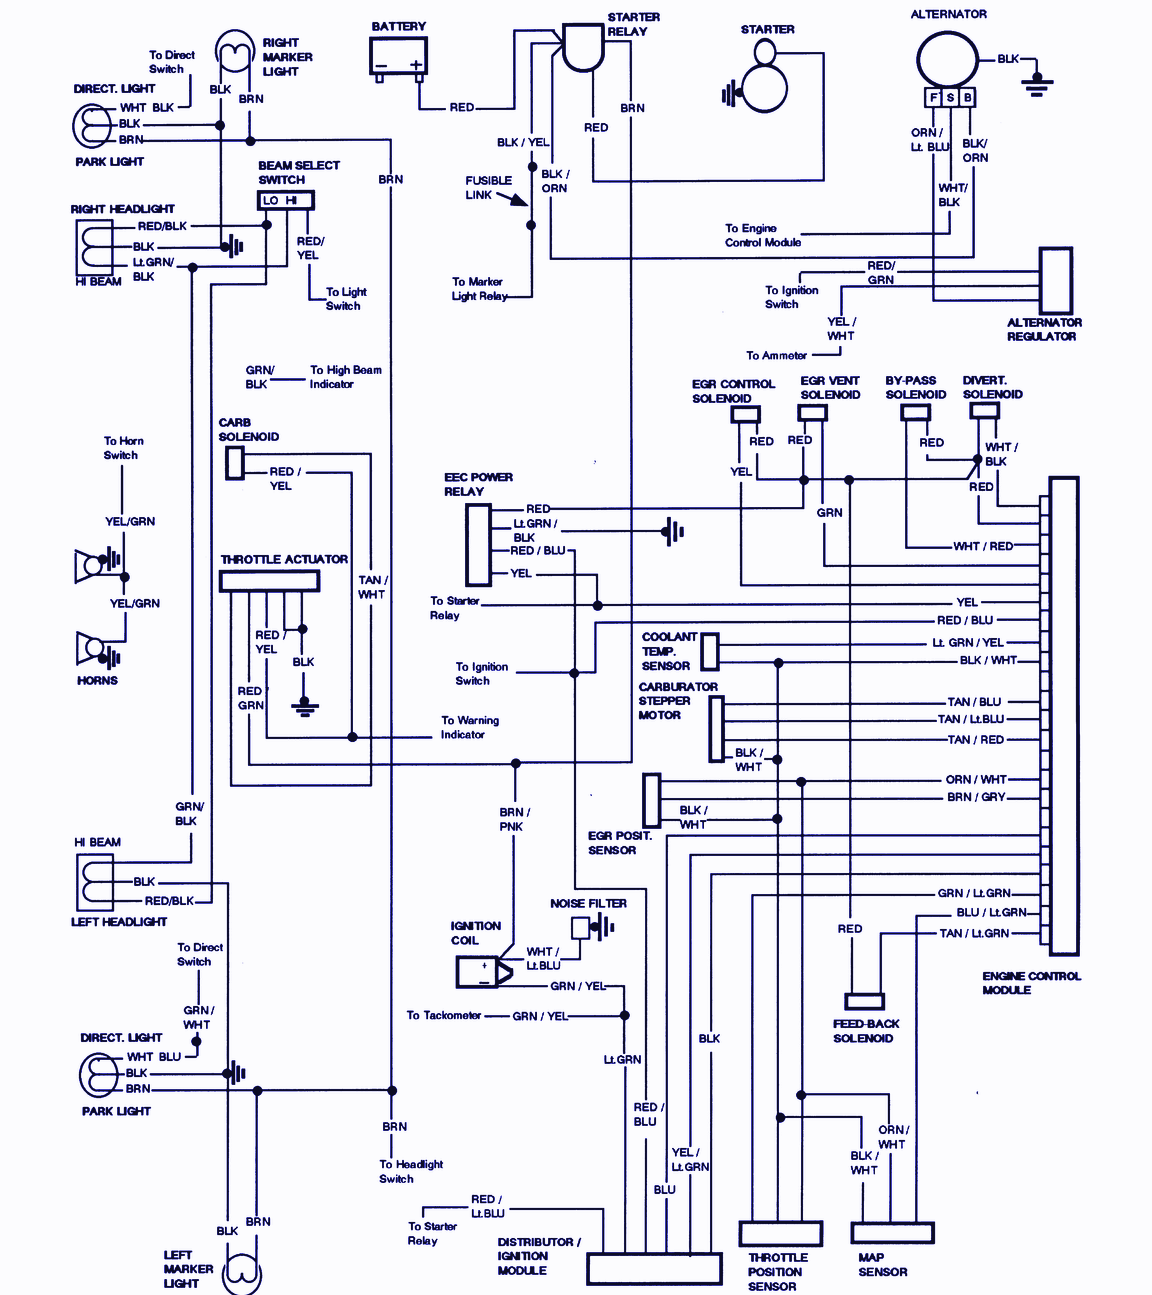 1985 Ford F250 Pickup Wiring Diagram | Circuit Schematic learn